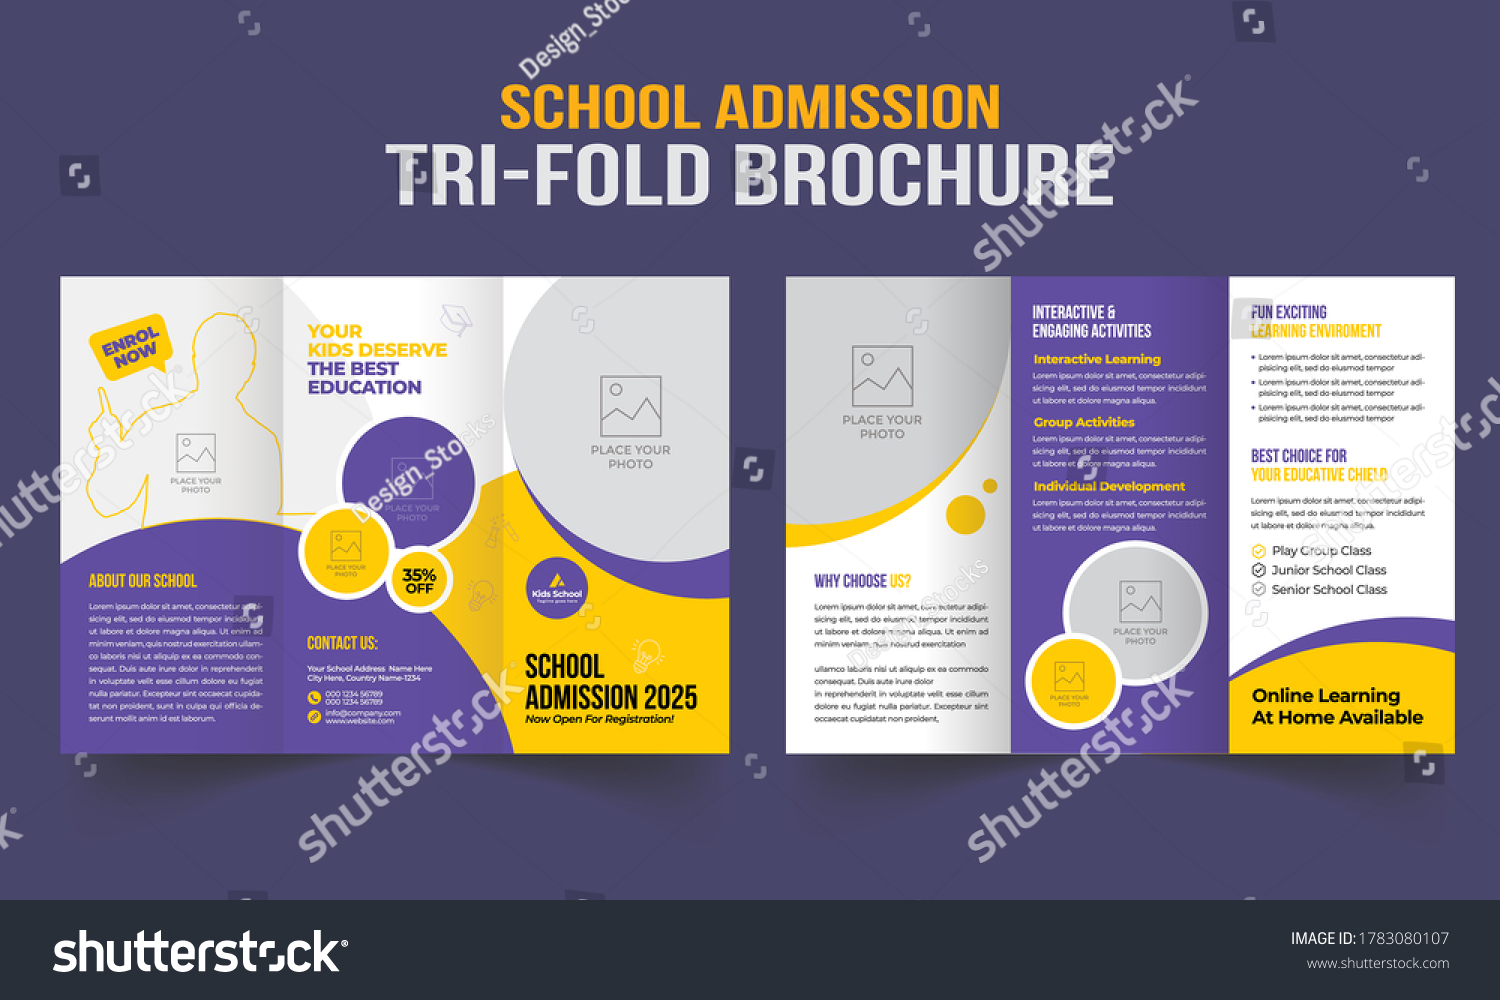 School Admission Trifold Brochure Template Kids Stock Vector In Tri Fold School Brochure Template